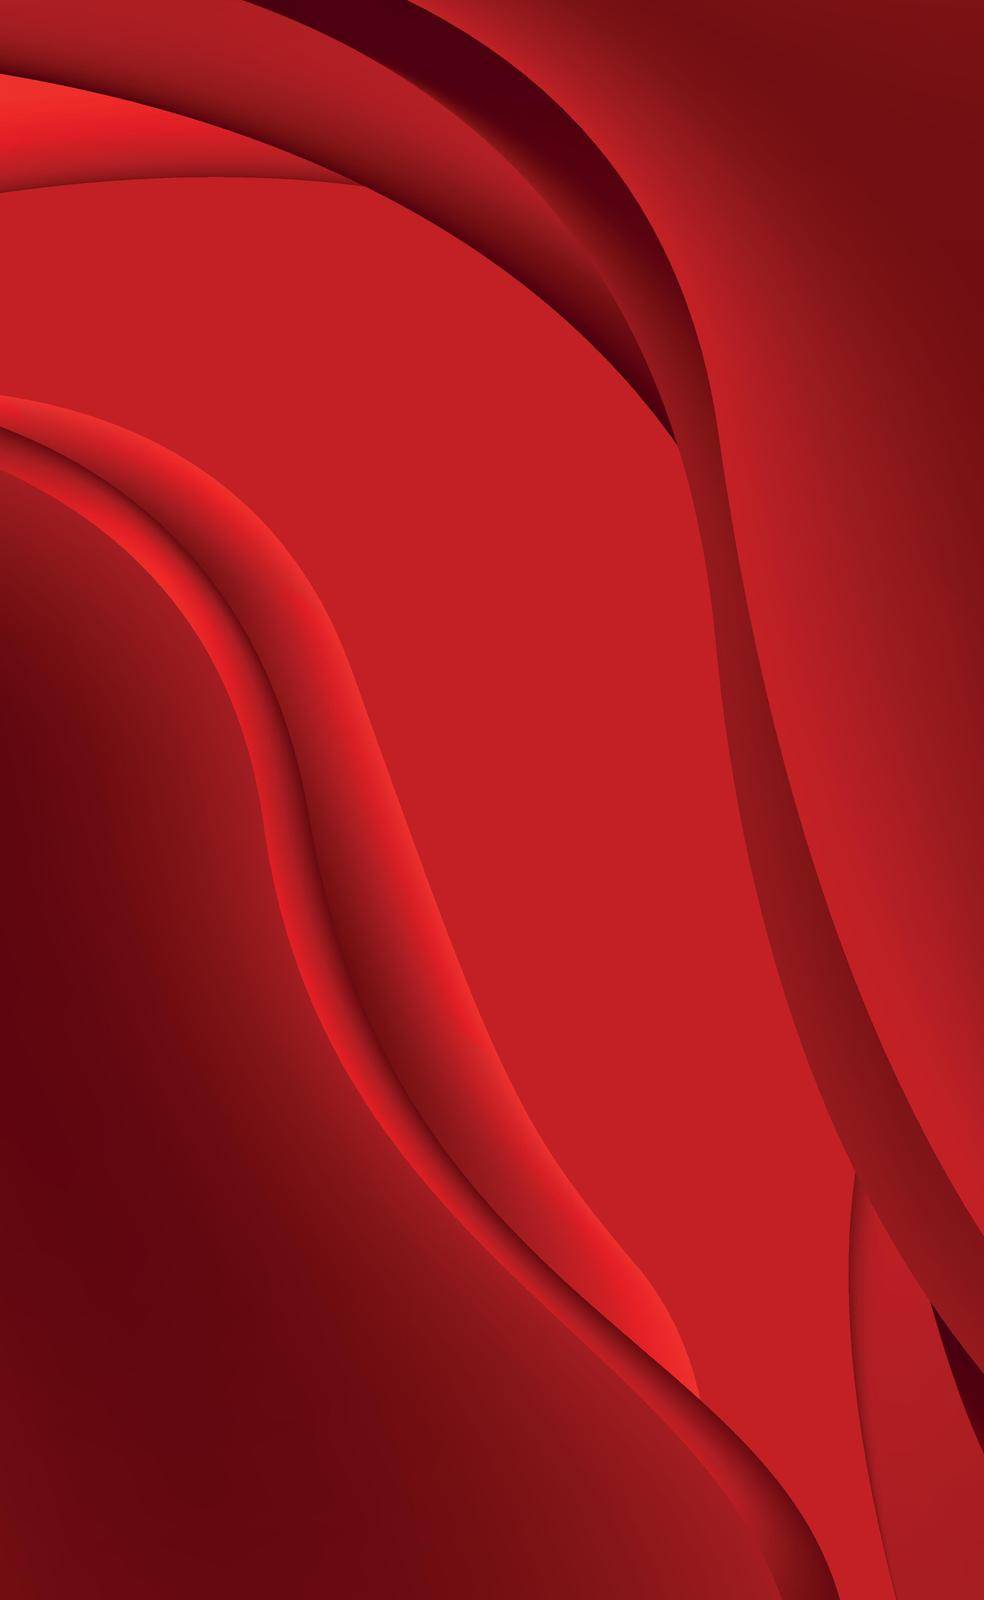 Volumetric lines on a red background - panoramic background